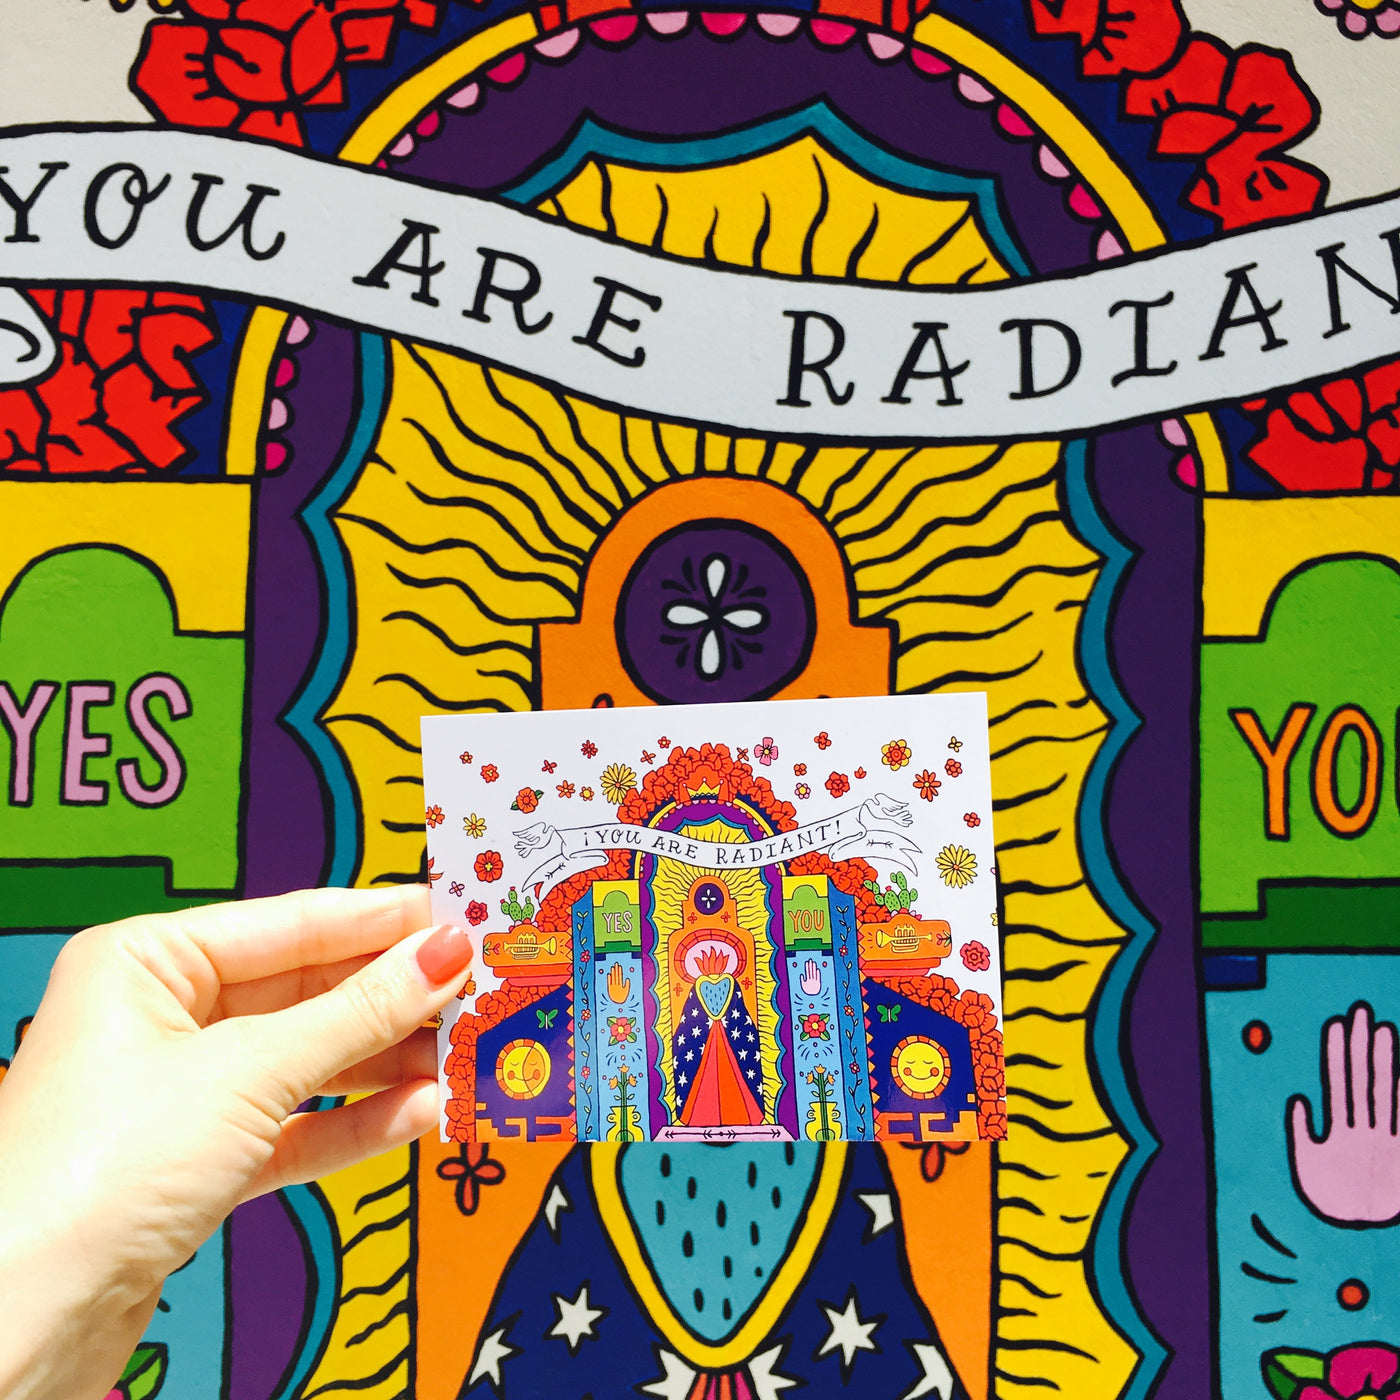 "You Are Radiant!" postcard in front of the real life Artelexia's exterior mural.